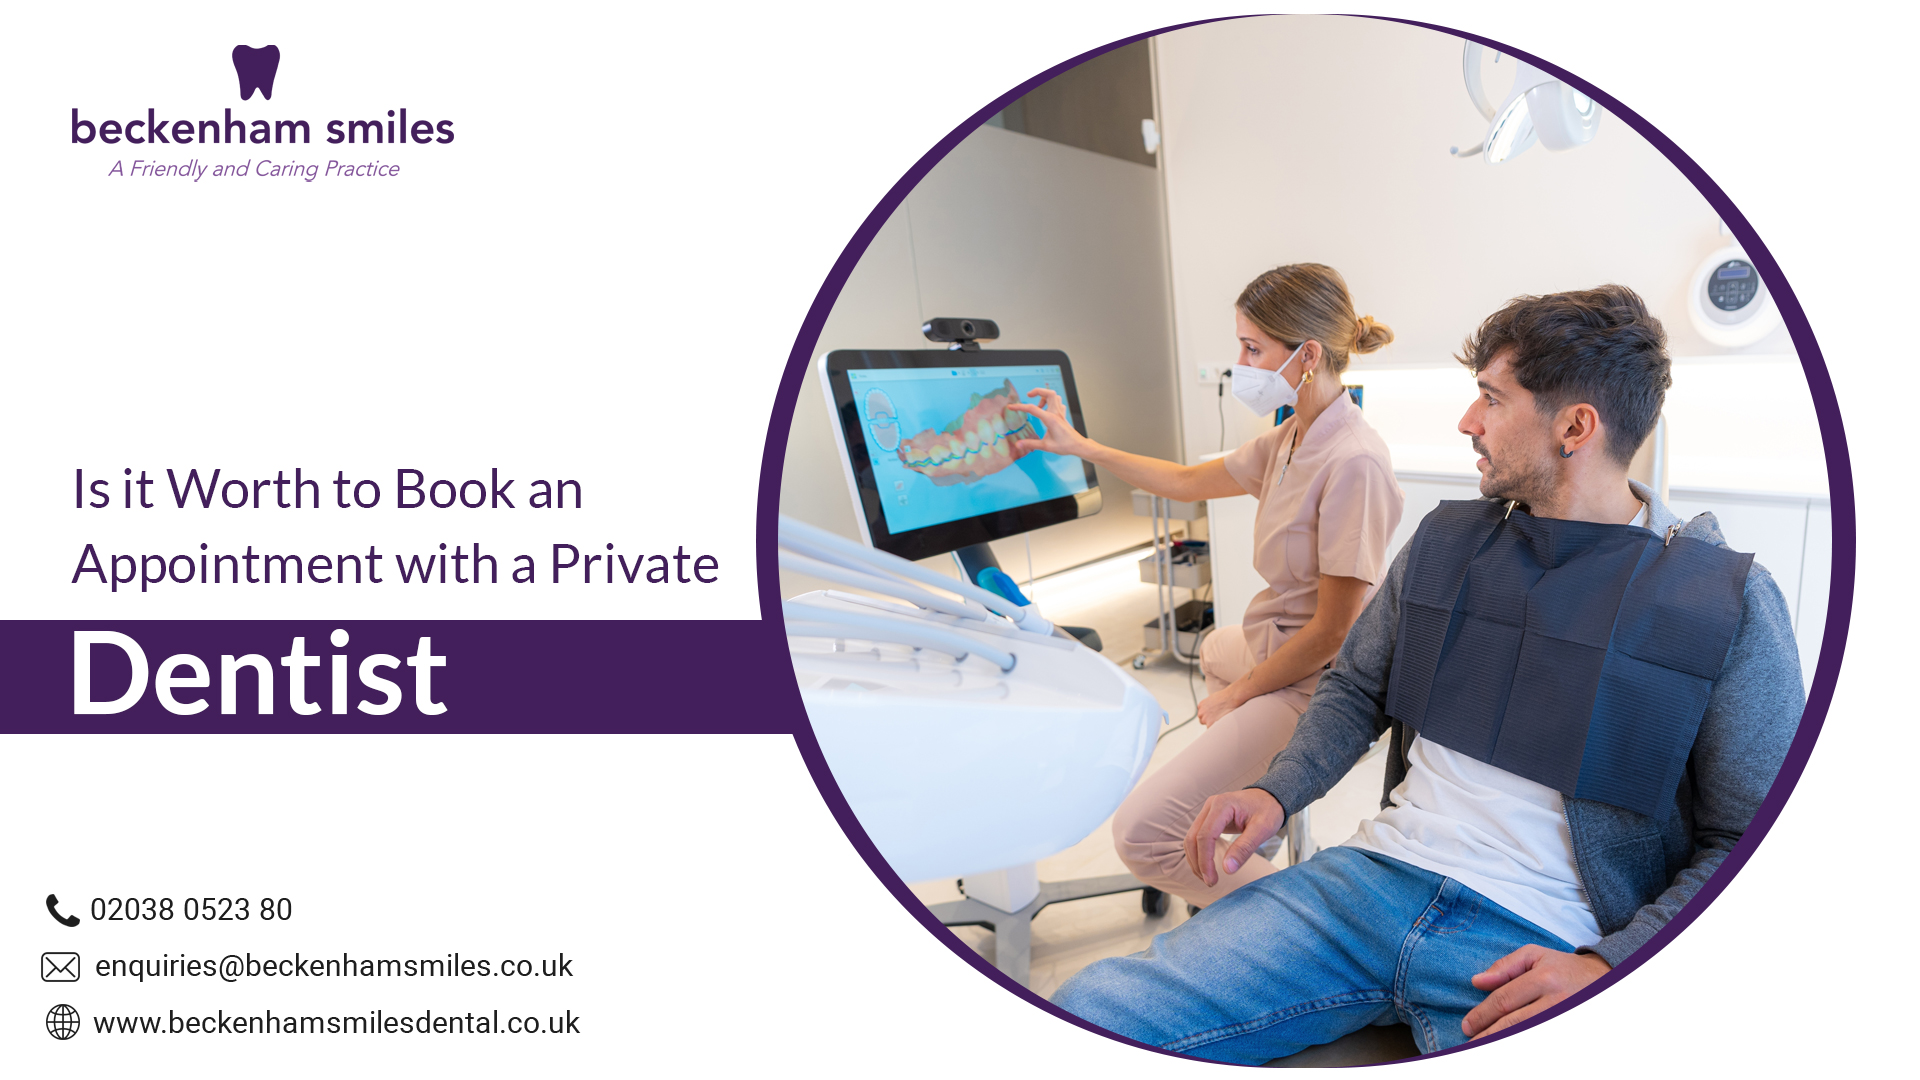 Is it Worth to Book an Appointment with a Private Dentist?